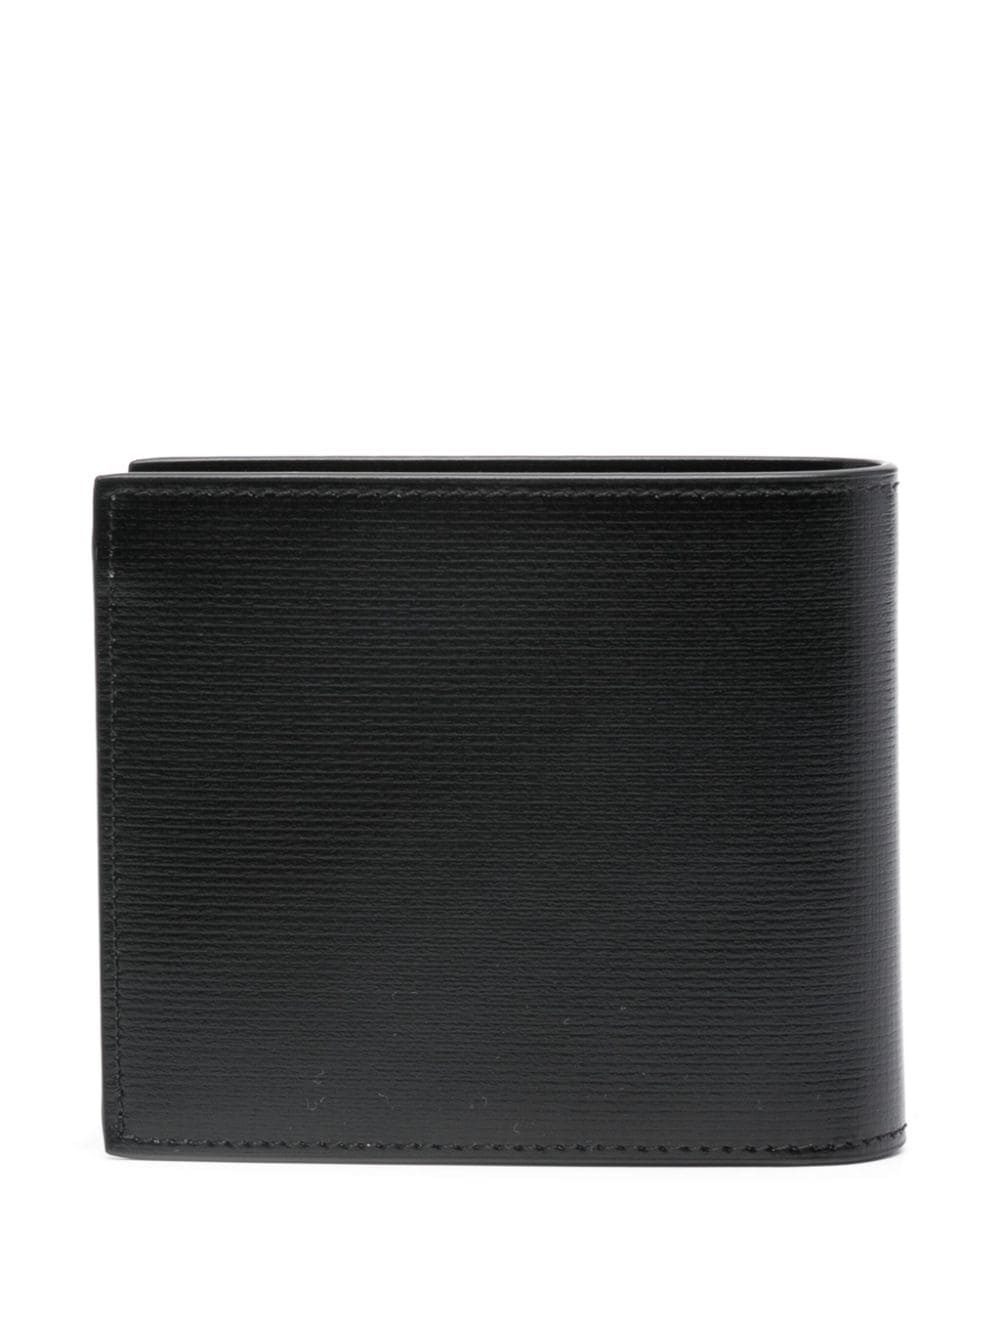 4G Classic leather wallet - 2